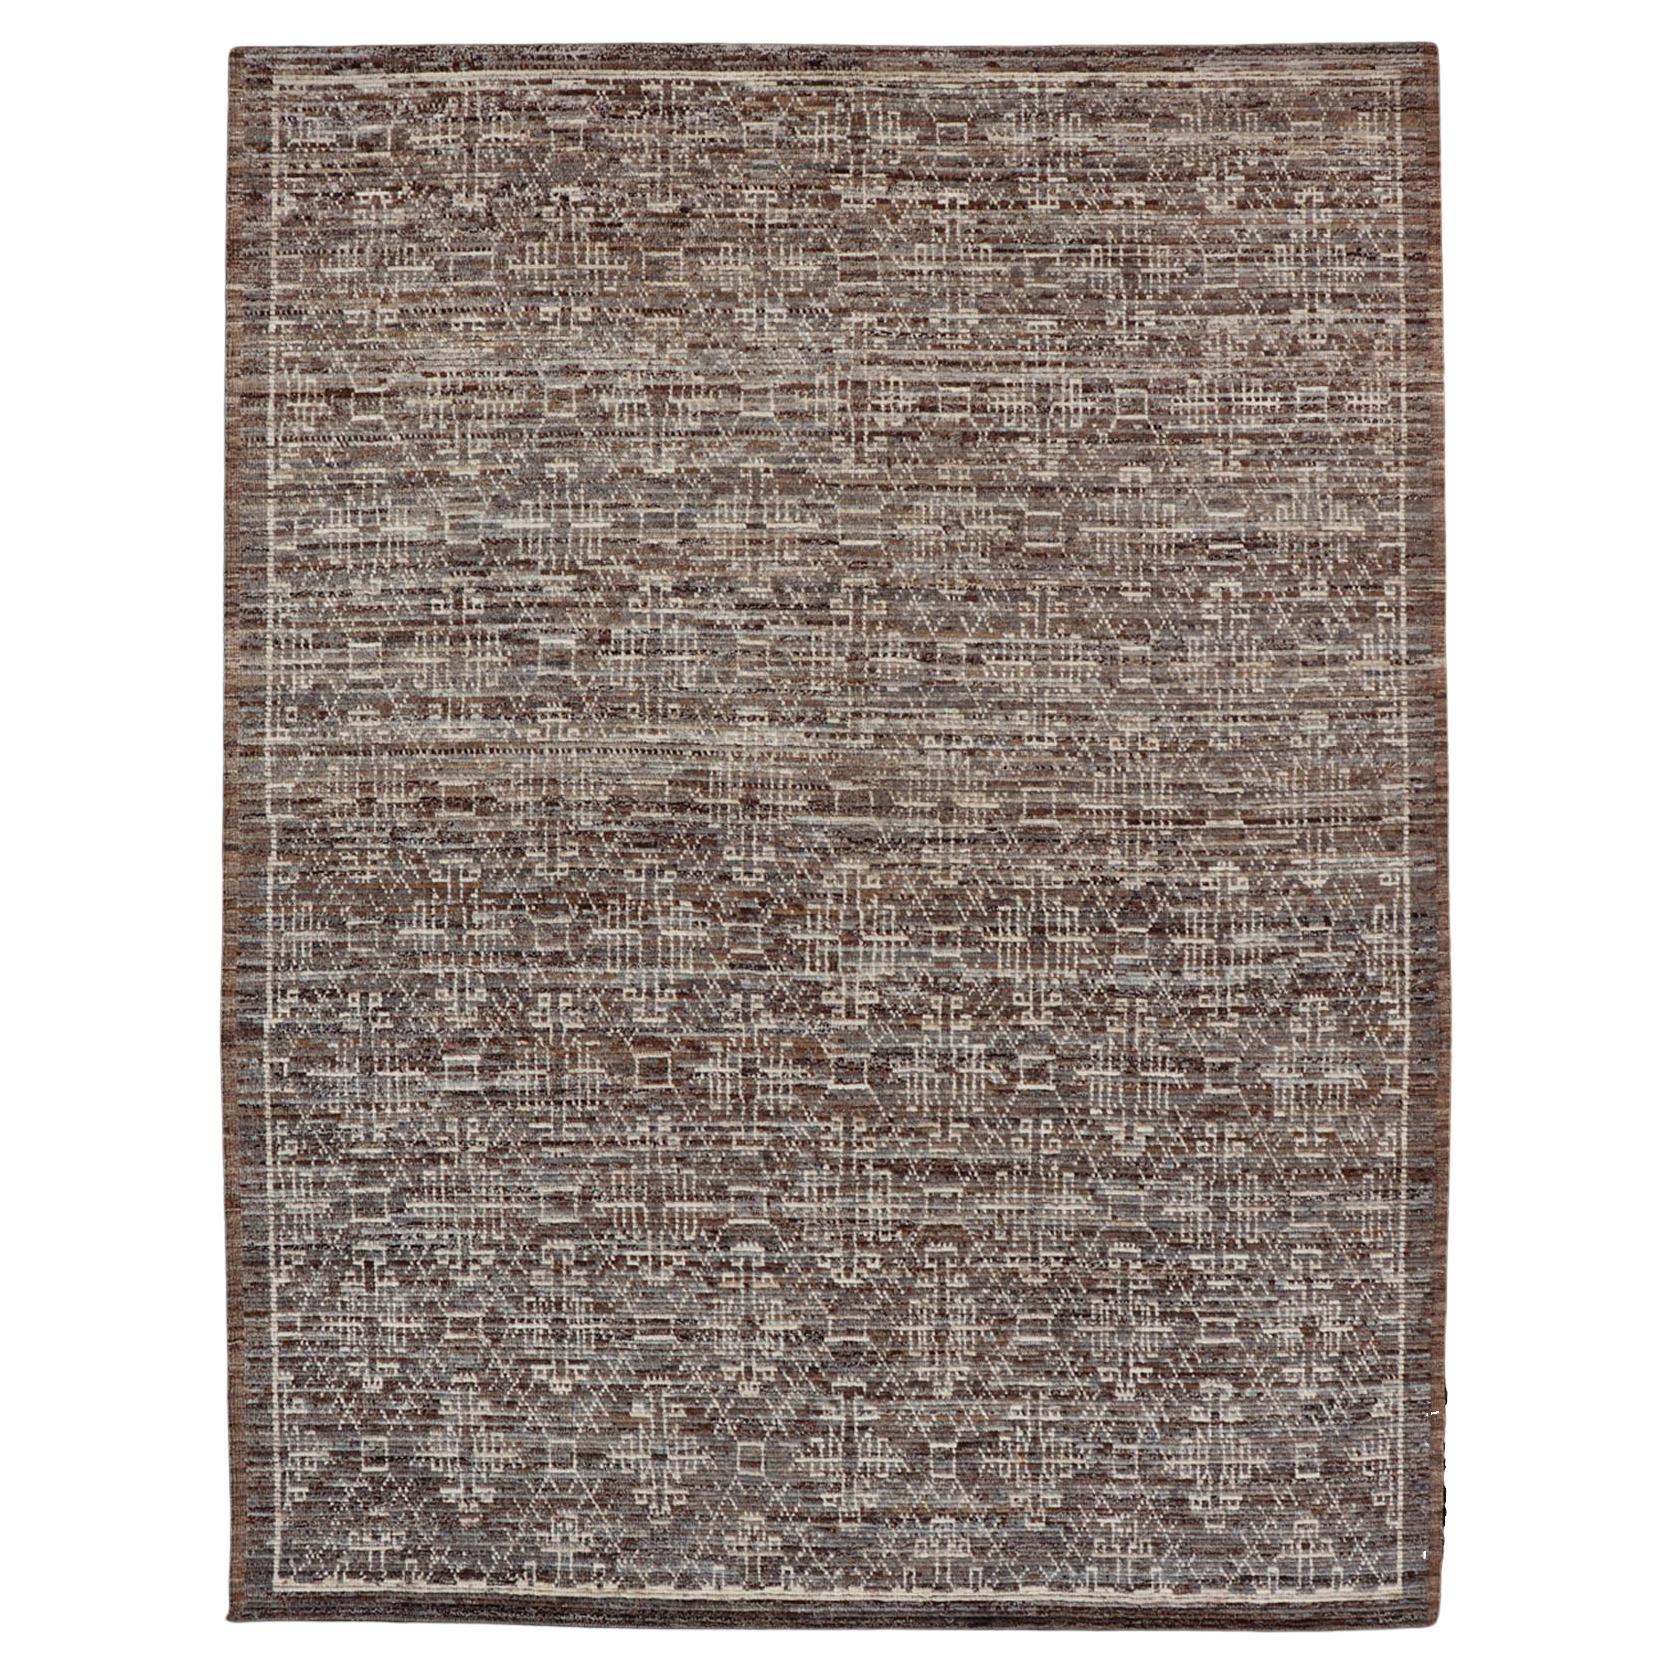 Modern Rug in Wool with All-Over Geometric Tribal Design in Brown and Ivory